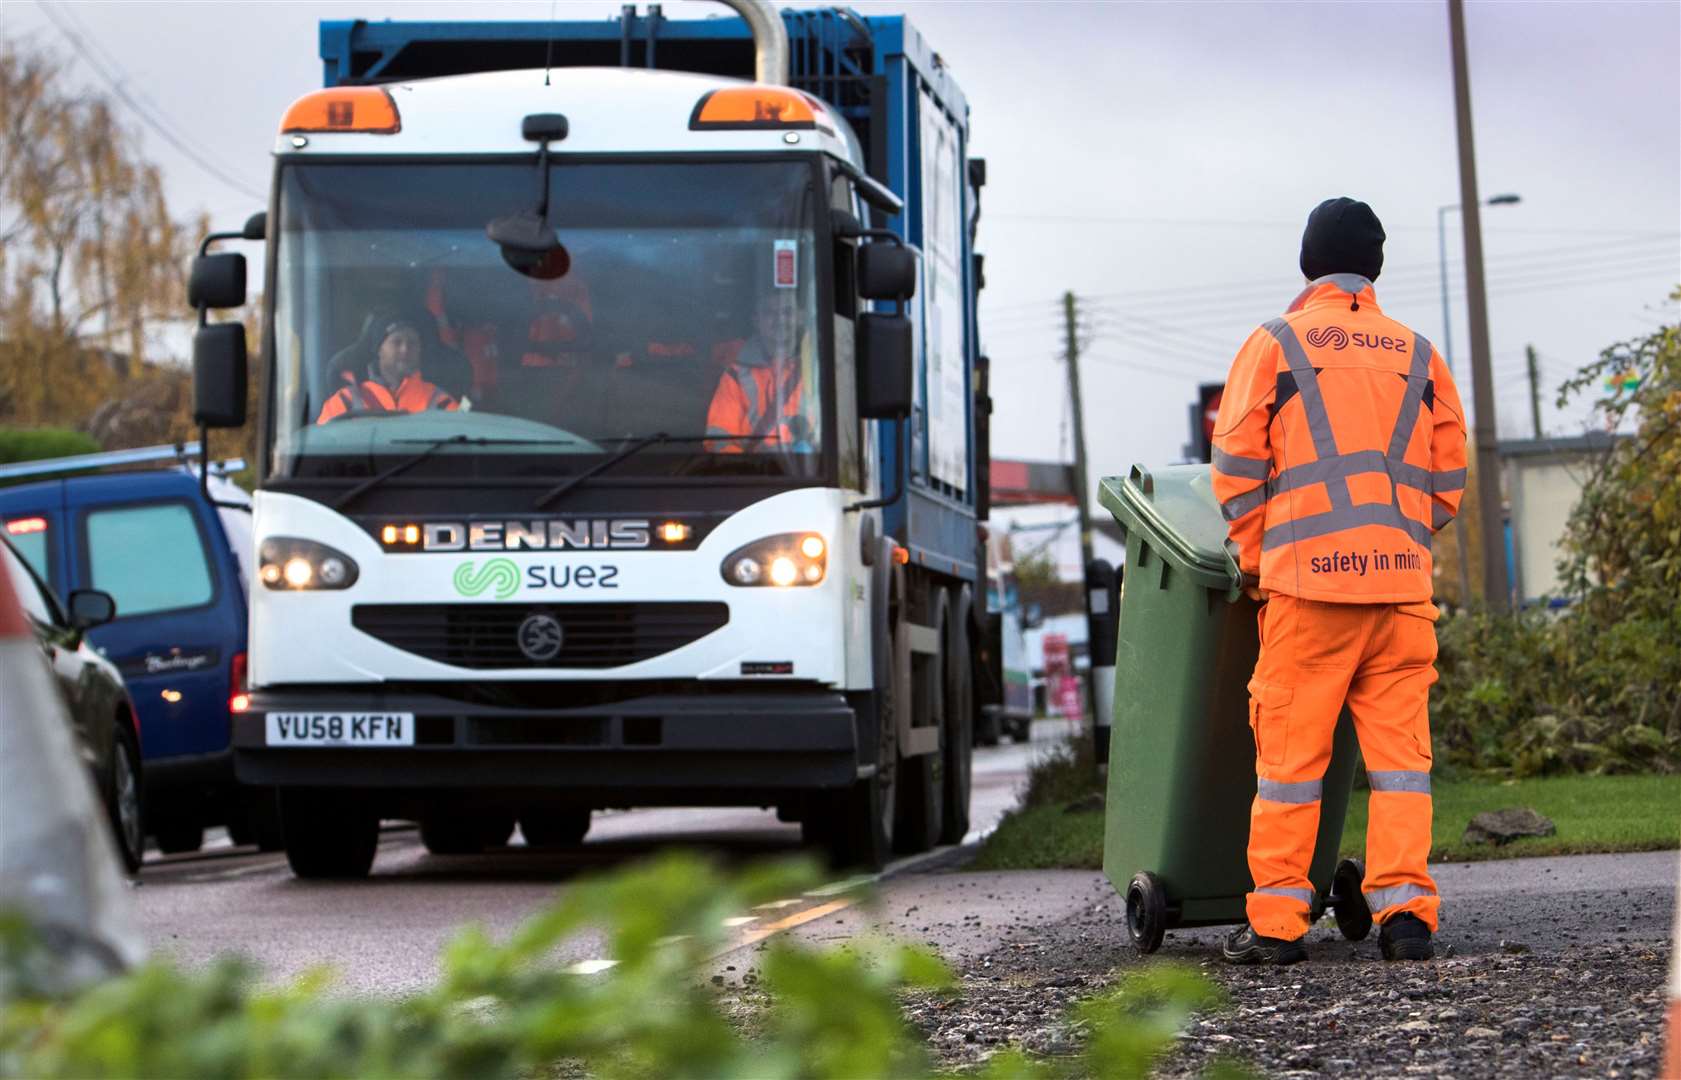 Problems with waste collection continue in Swale. Picture: Suez